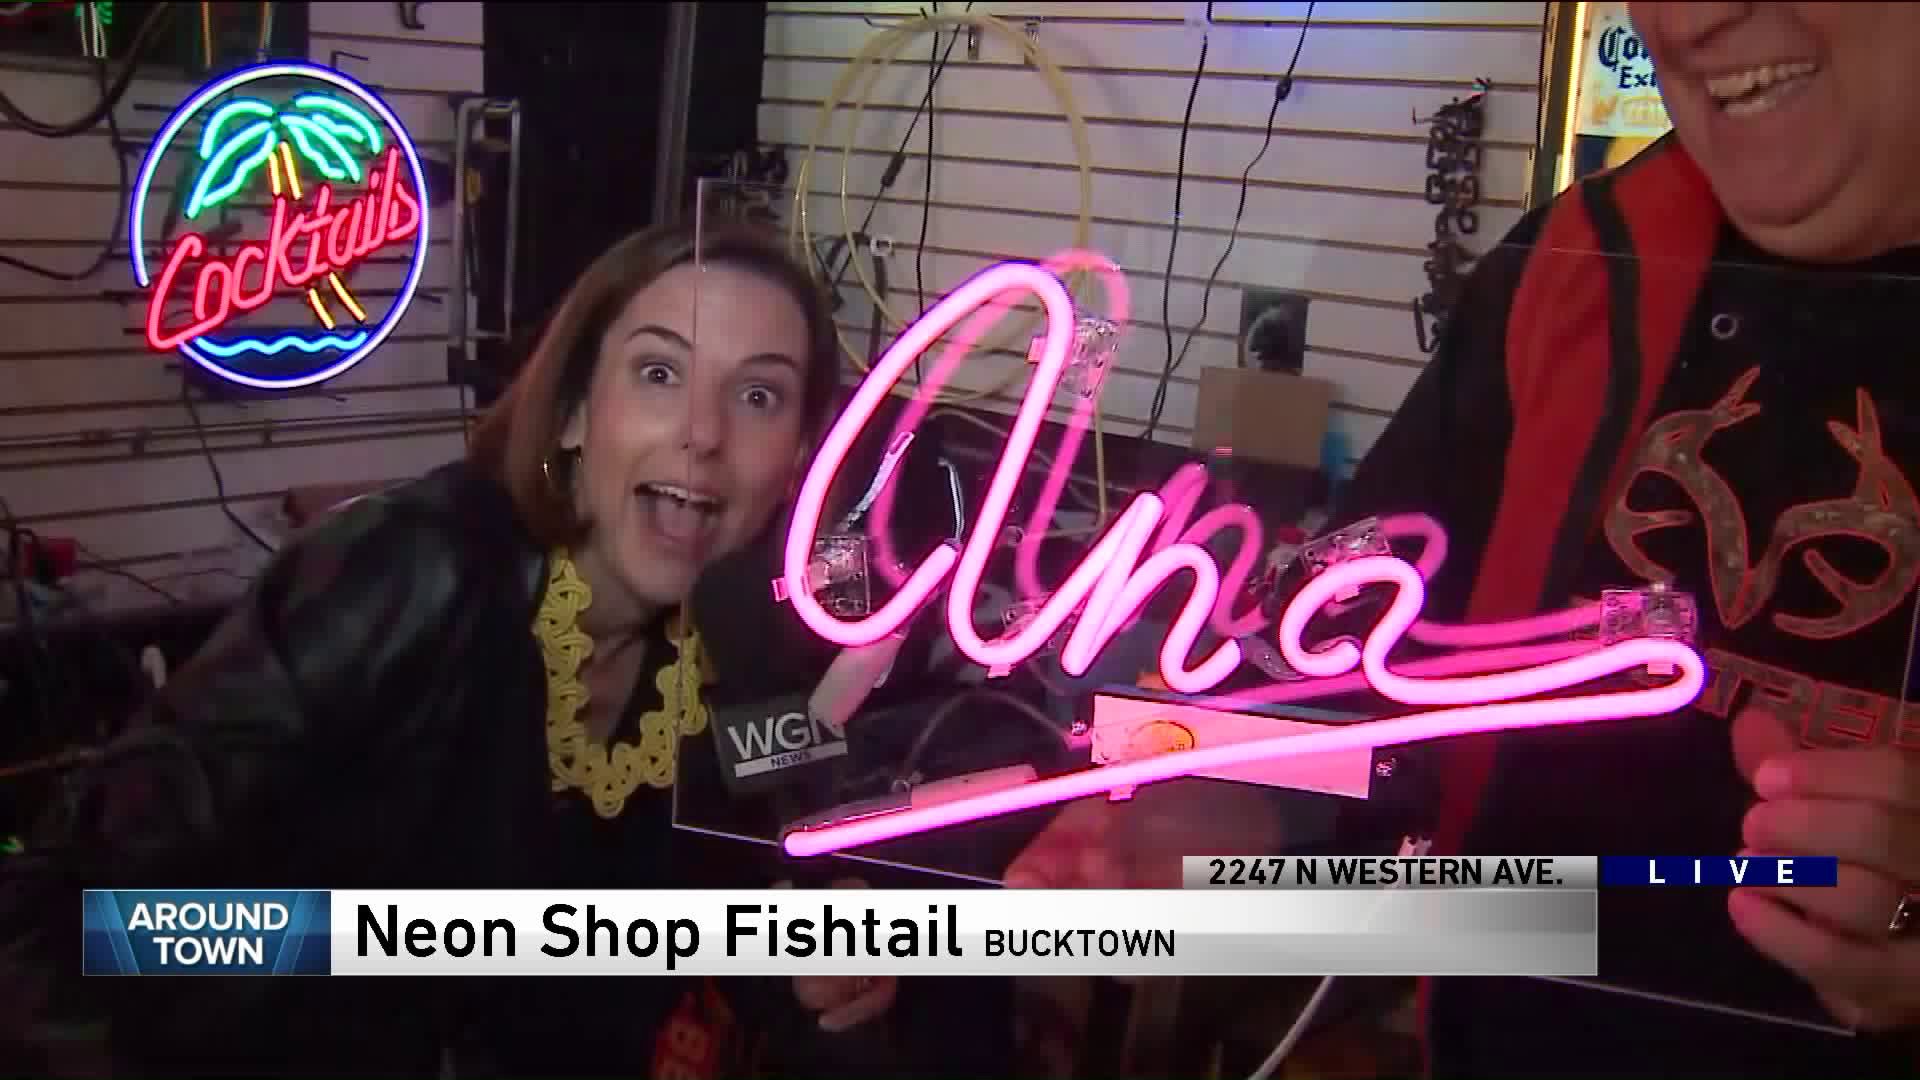 Neon Shop Fishtail makes one of Ana’s dreams come true Around Town